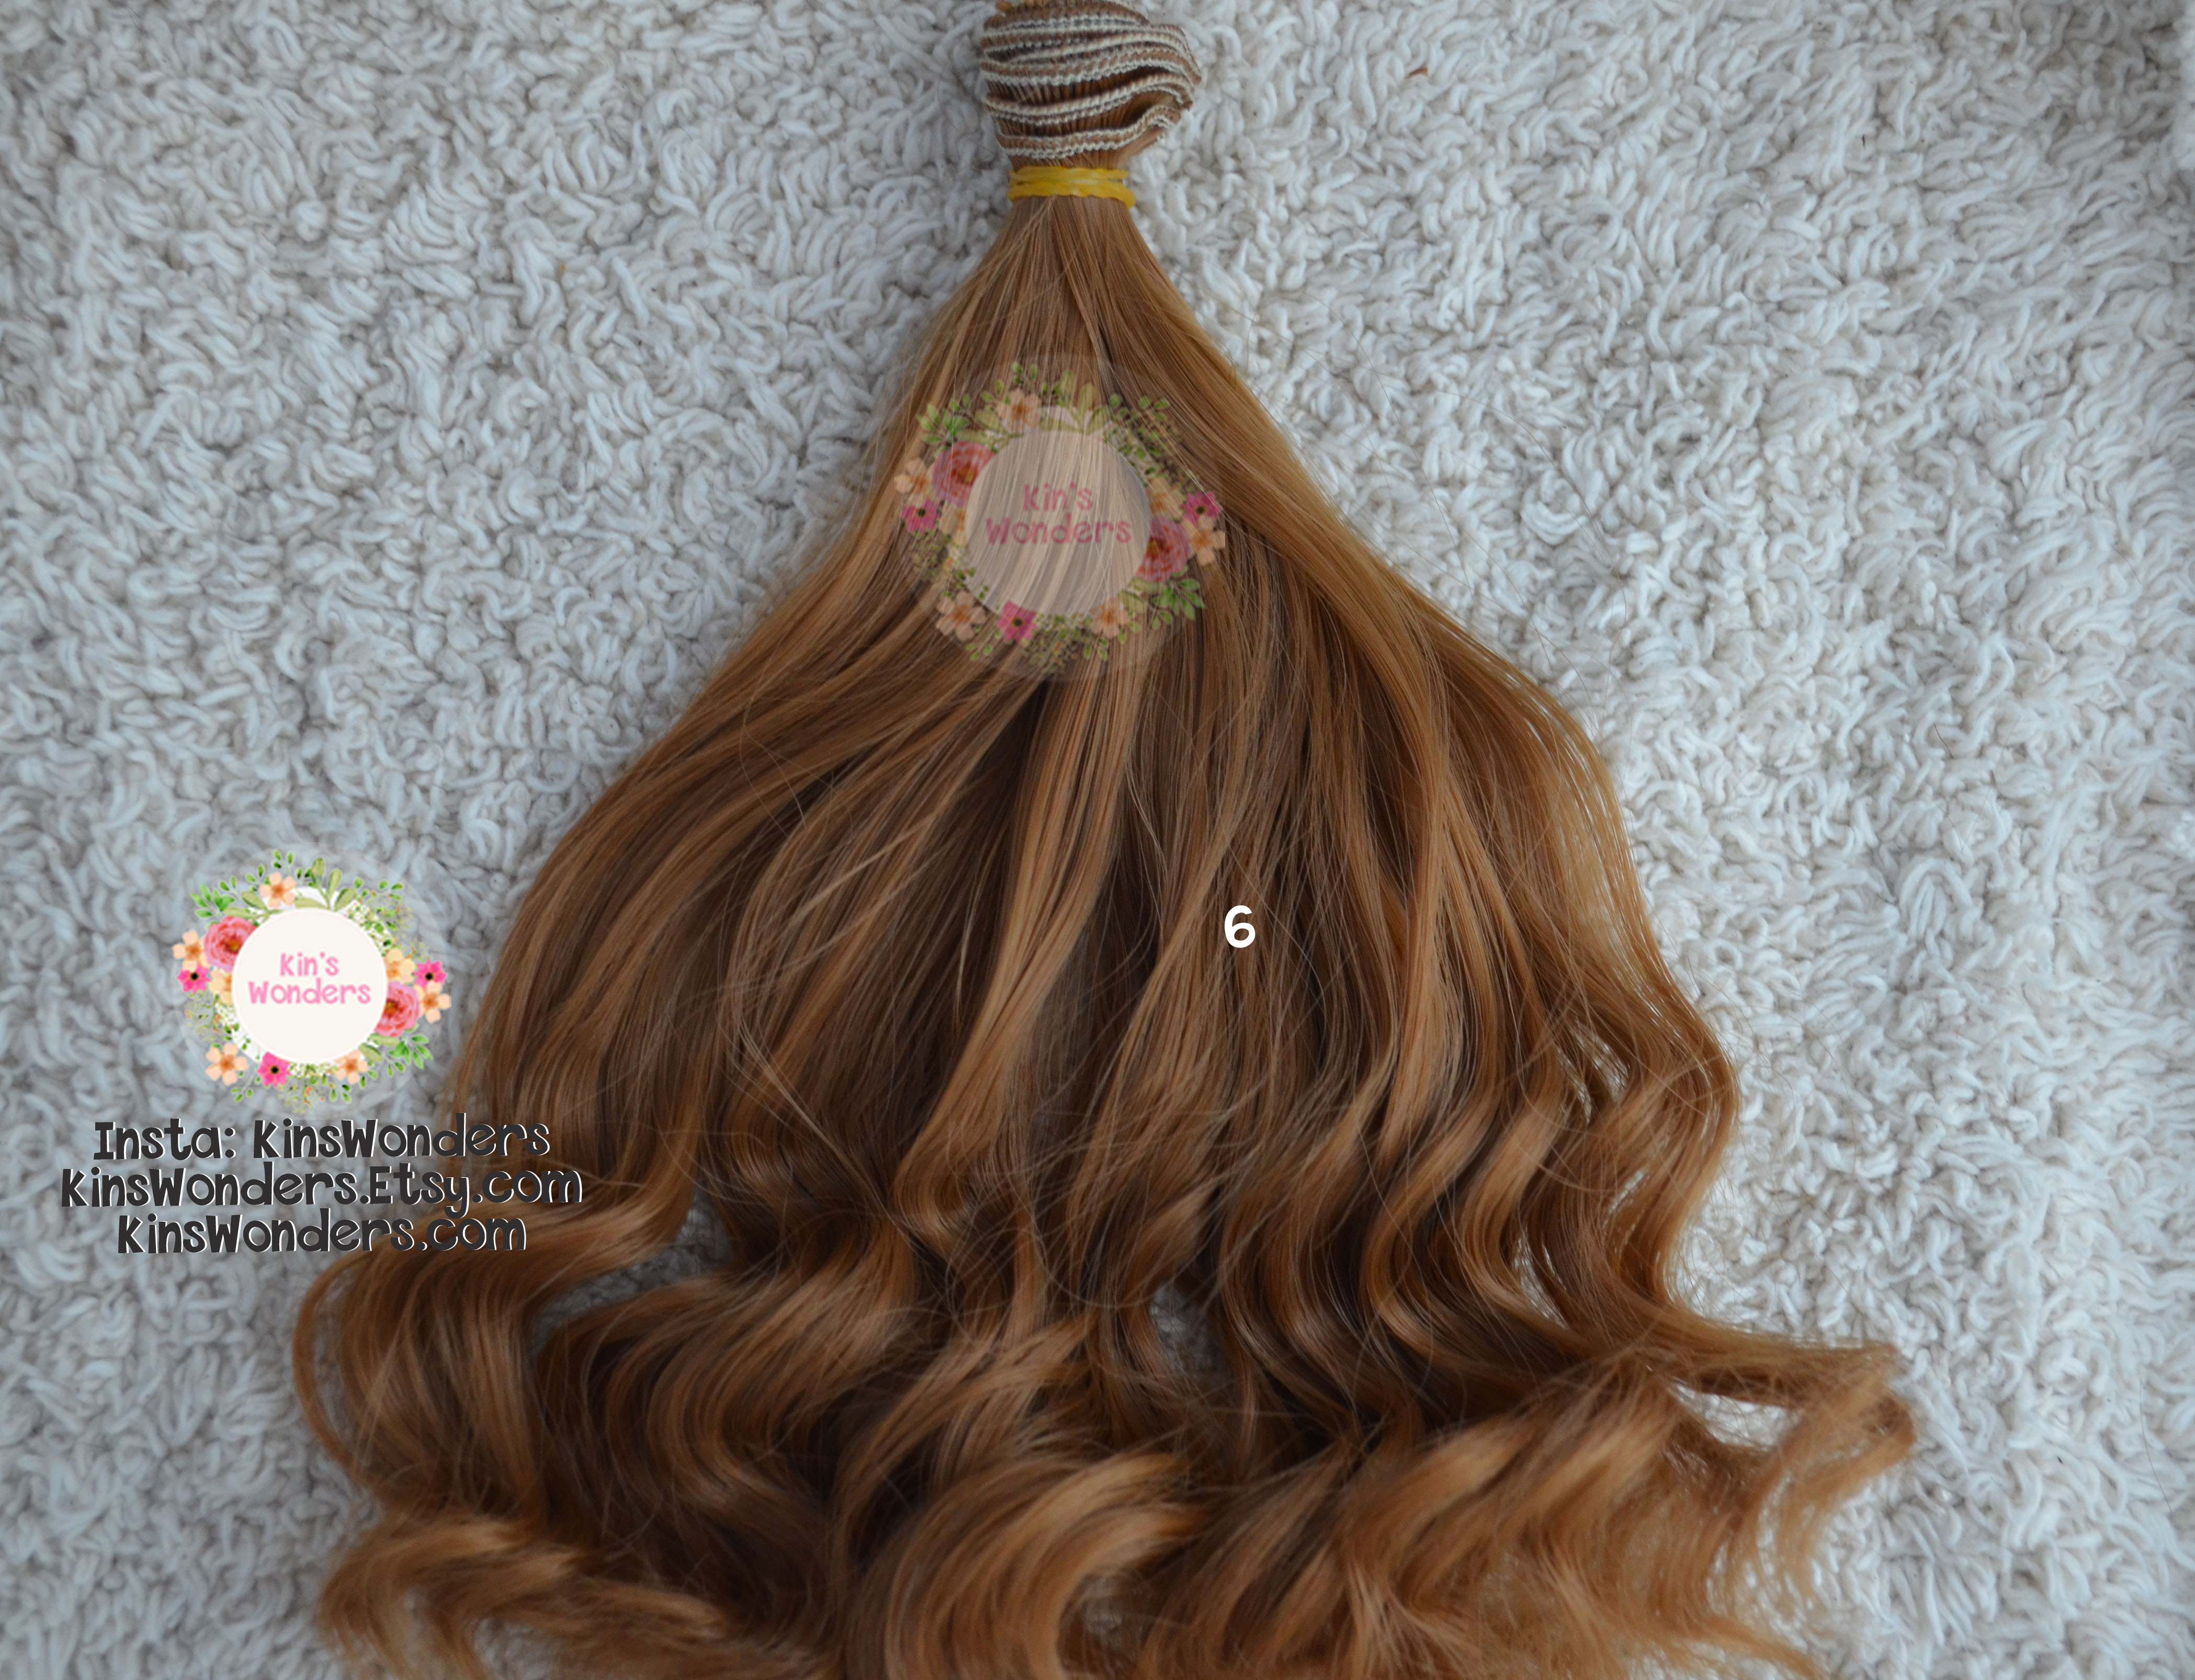 1. "Curly Blonde Hair Weft" by Luxy Hair - wide 3